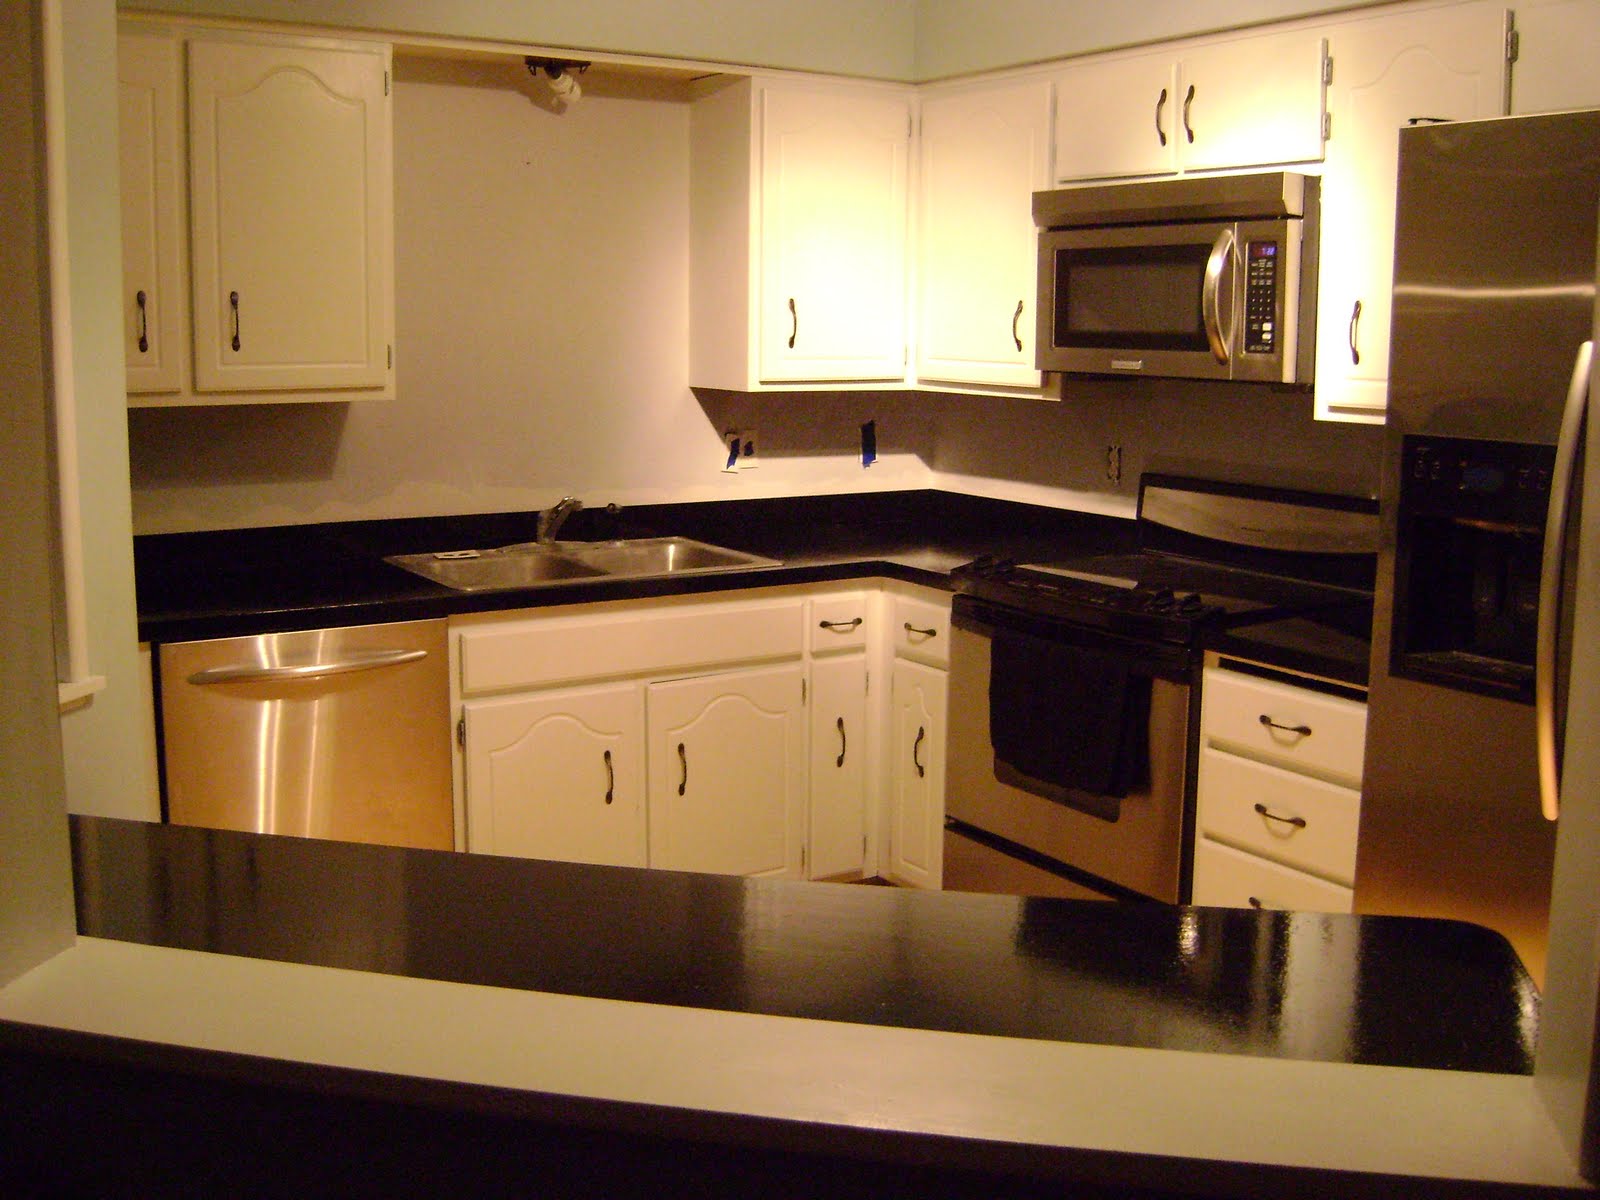 Our Hobby House Painted Faux Granite Countertops